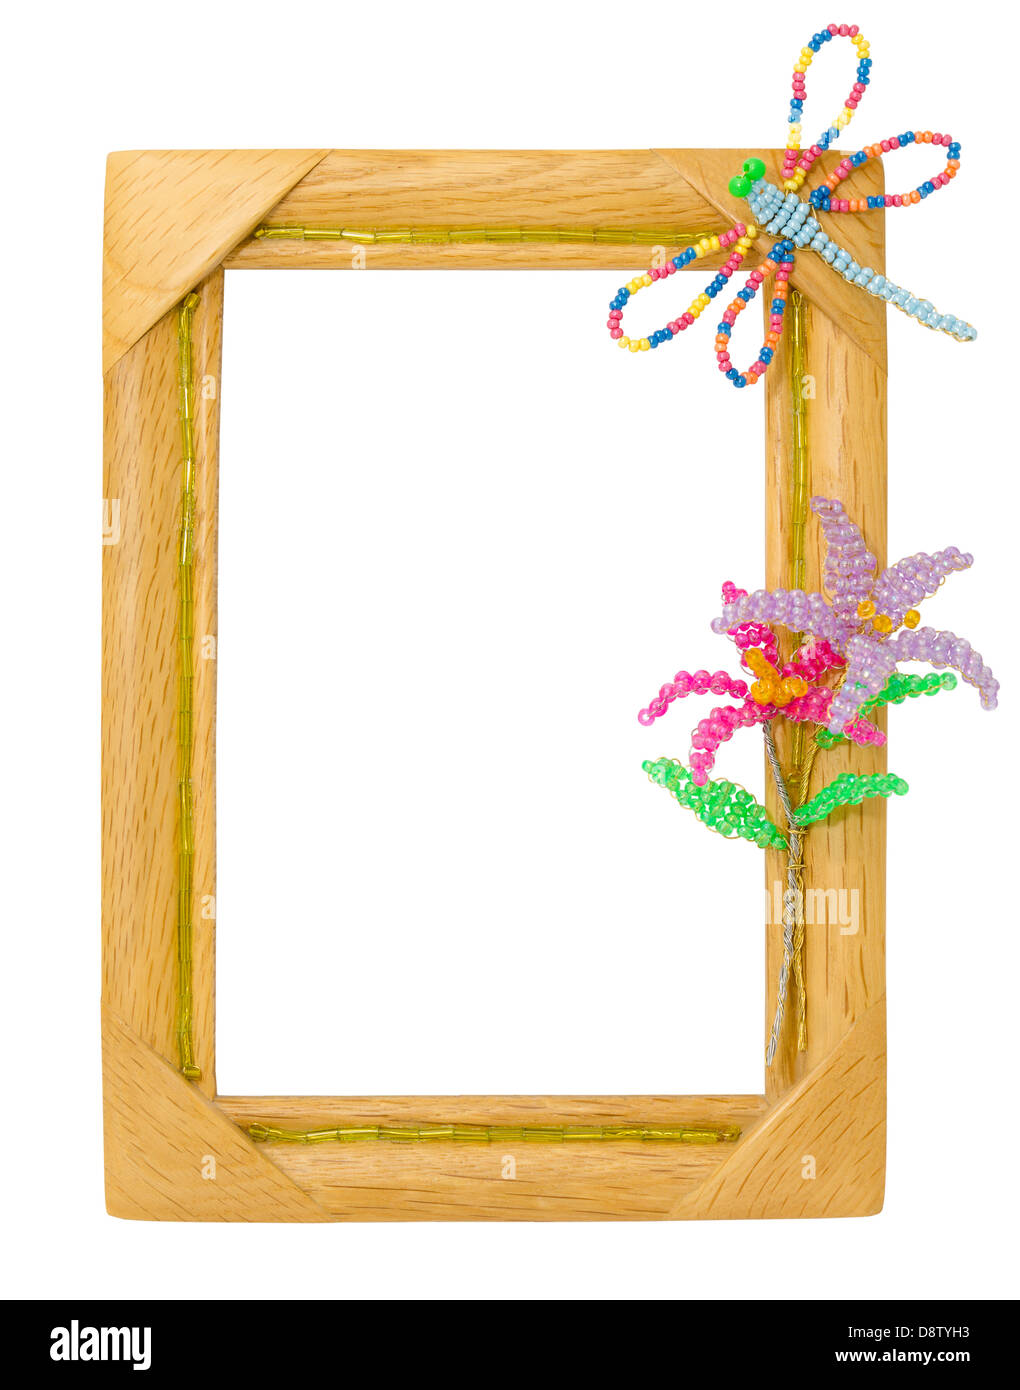 Handmade photo frame Cut Out Stock Images & Pictures - Alamy